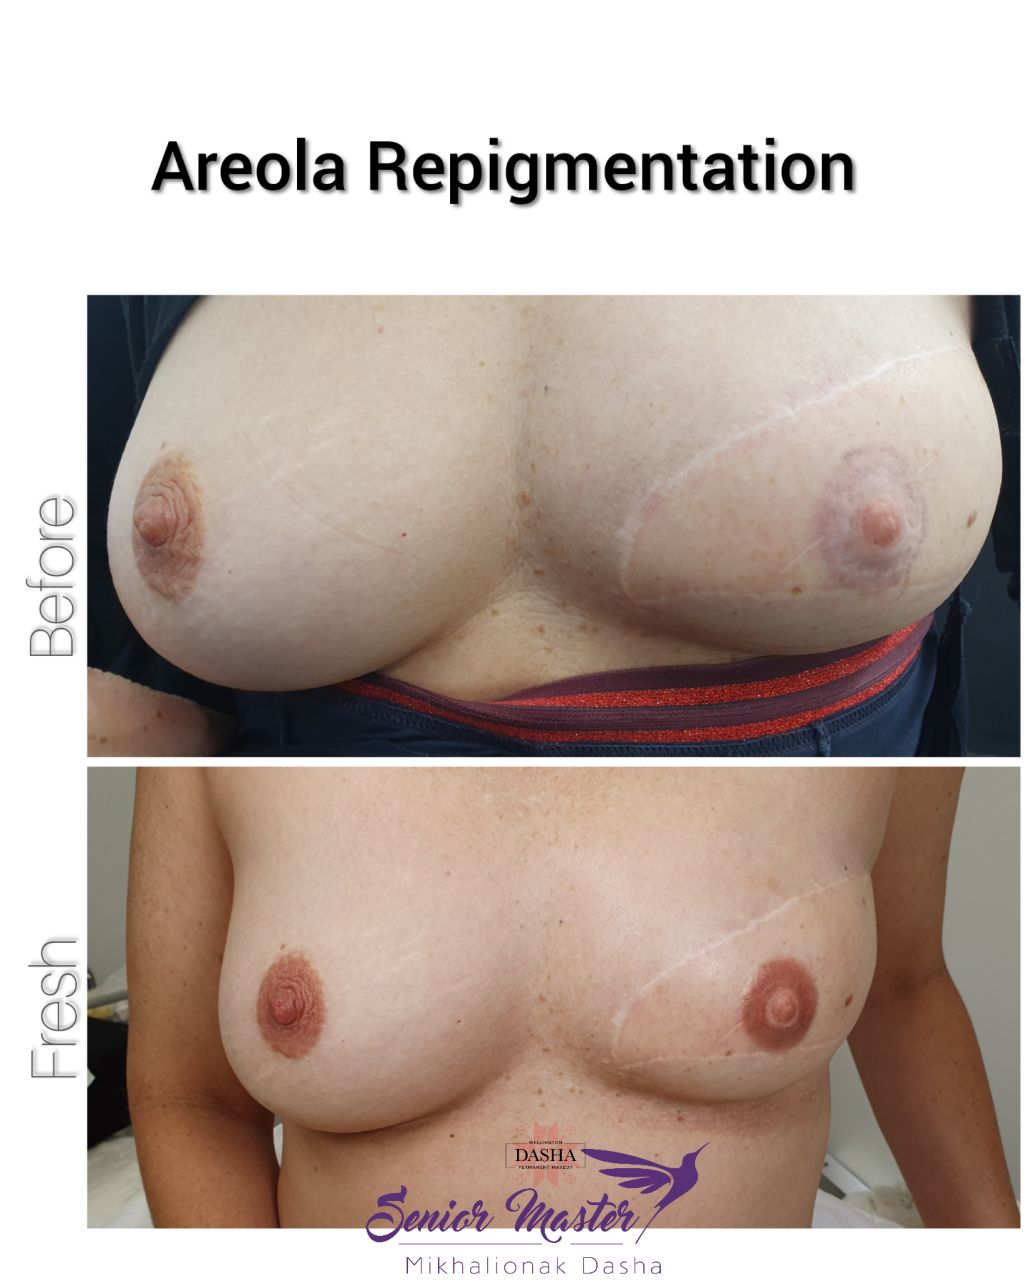 3D Areola Repigmentation, Medical Tattoo. Cosmetic and Mediical Tattoo by Dasha. Permanent makeup and reconstructive tattoo, scalp micro-pigmentation in Christchurch, New Zealand